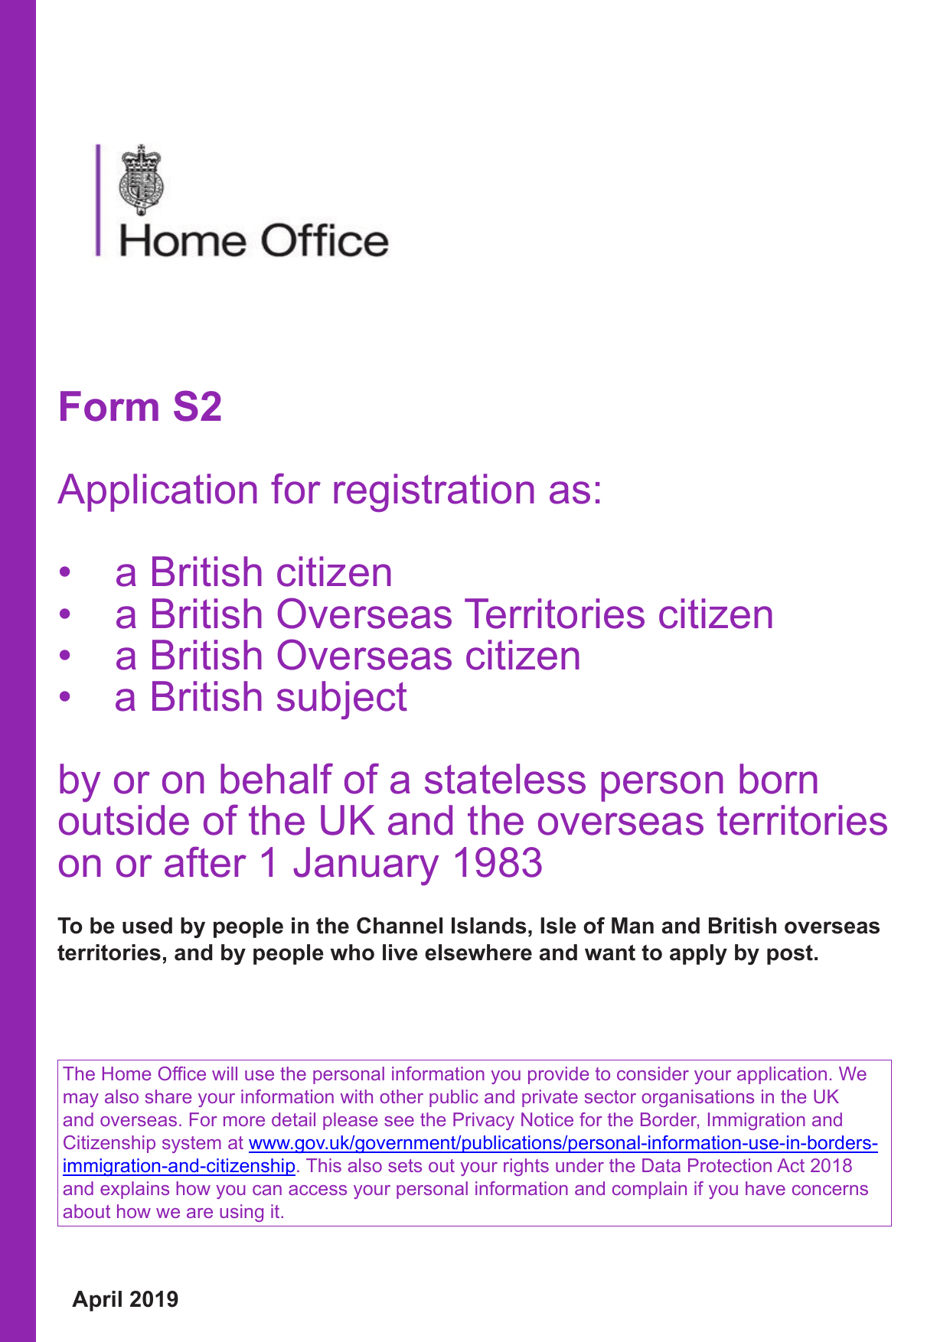 Form S2 Application for Registration as a British Citizen / A British Overseas Territories Citizen / A British Overseas Citizen / A British Subject by or on Behalf of a Stateless Person Born Outside of the UK and the Overseas Territories on or After 1 January 1983 - United Kingdom, Page 1